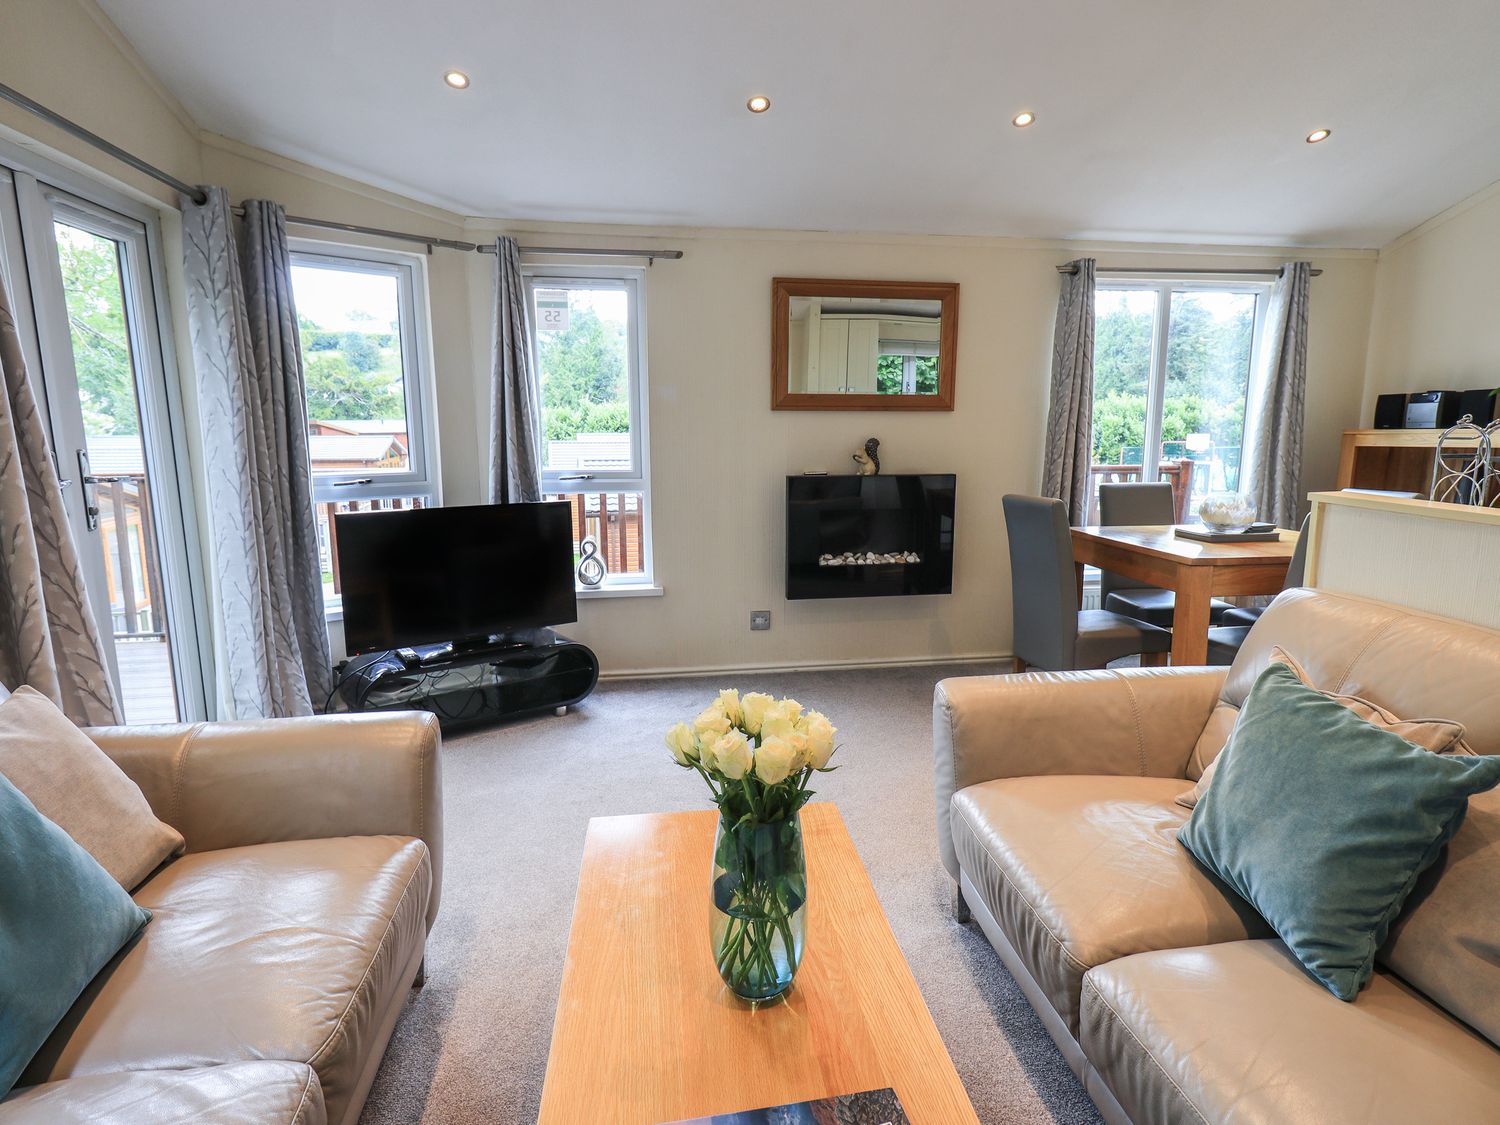 Acorn Bank Lodge, Bowness-On-Windermere